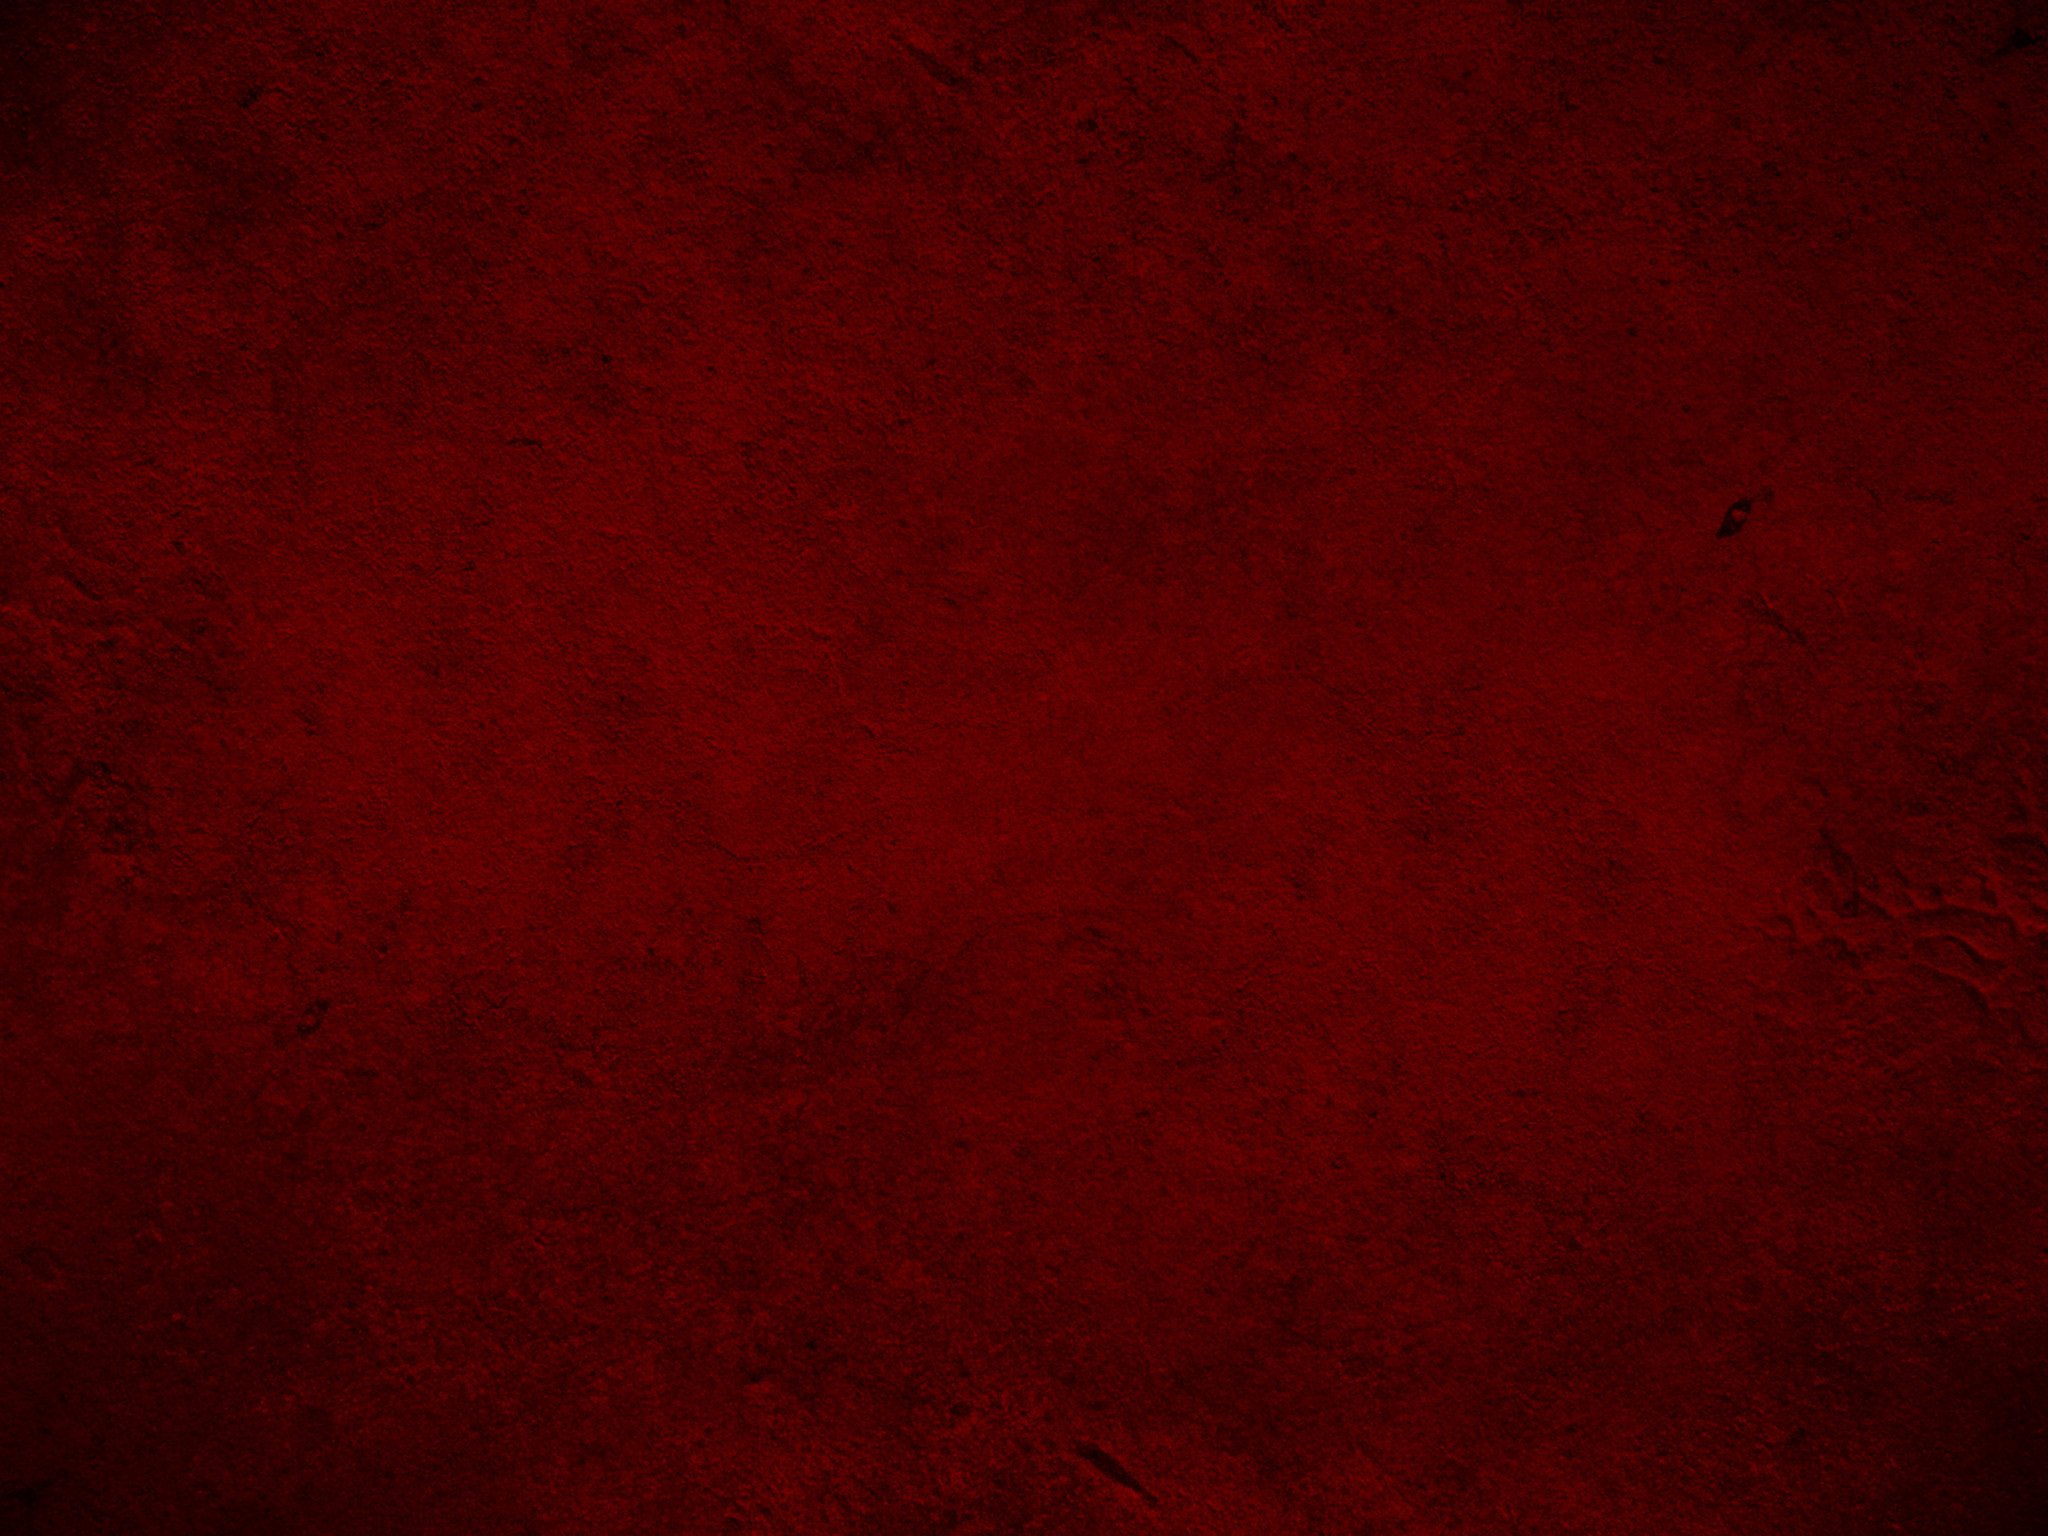 2048x1536 http://images.athleo.net/backgrounds/Red.jpg